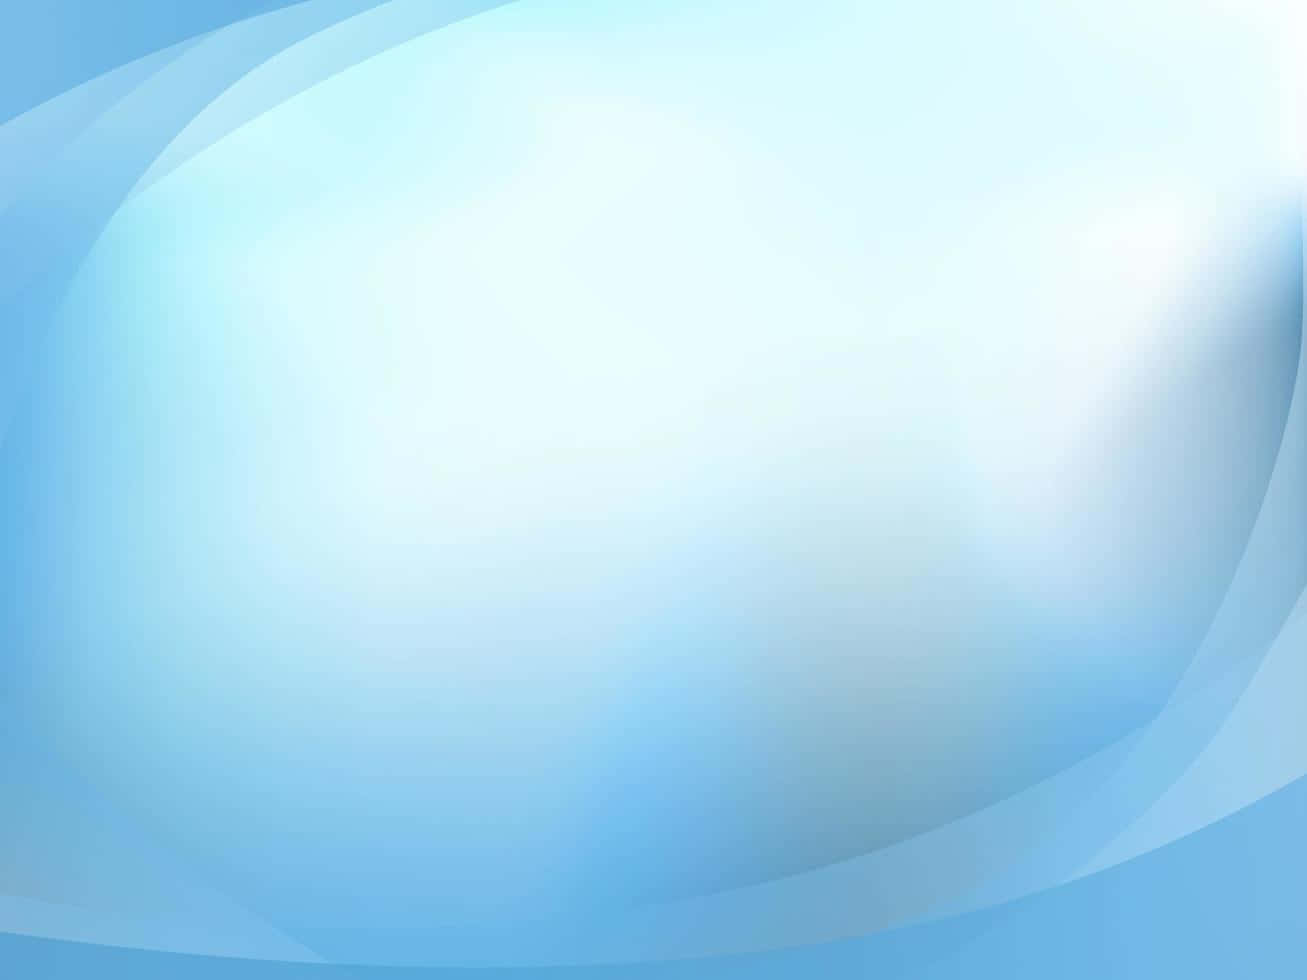 Oval Blue Background Wallpaper